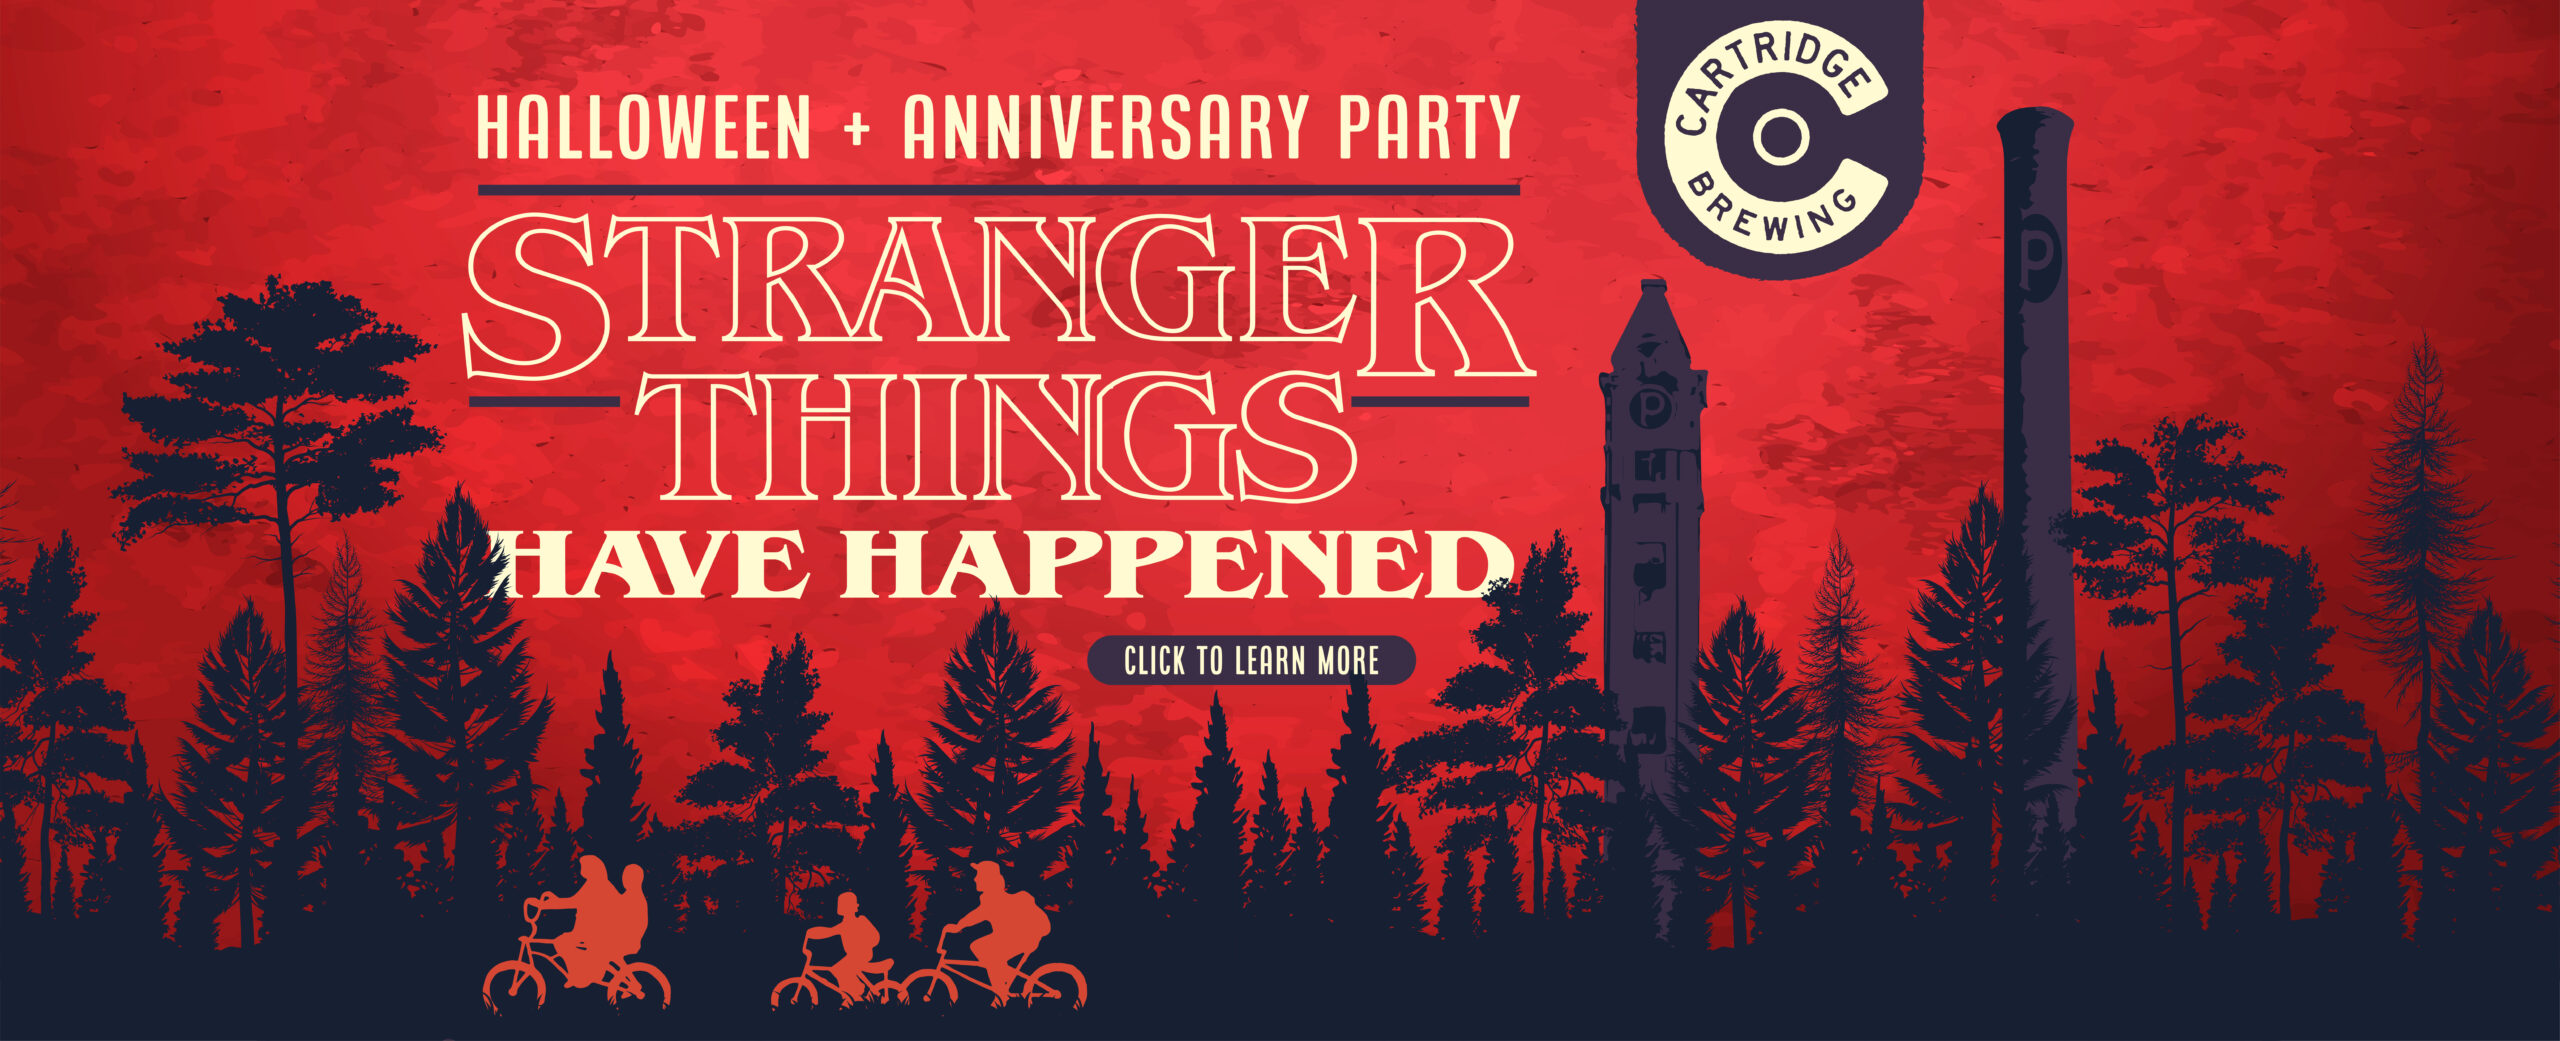 Cartridge Brewing. Halloween + Anniversary Party. Stranger Things Have Happened. Click to learn more.